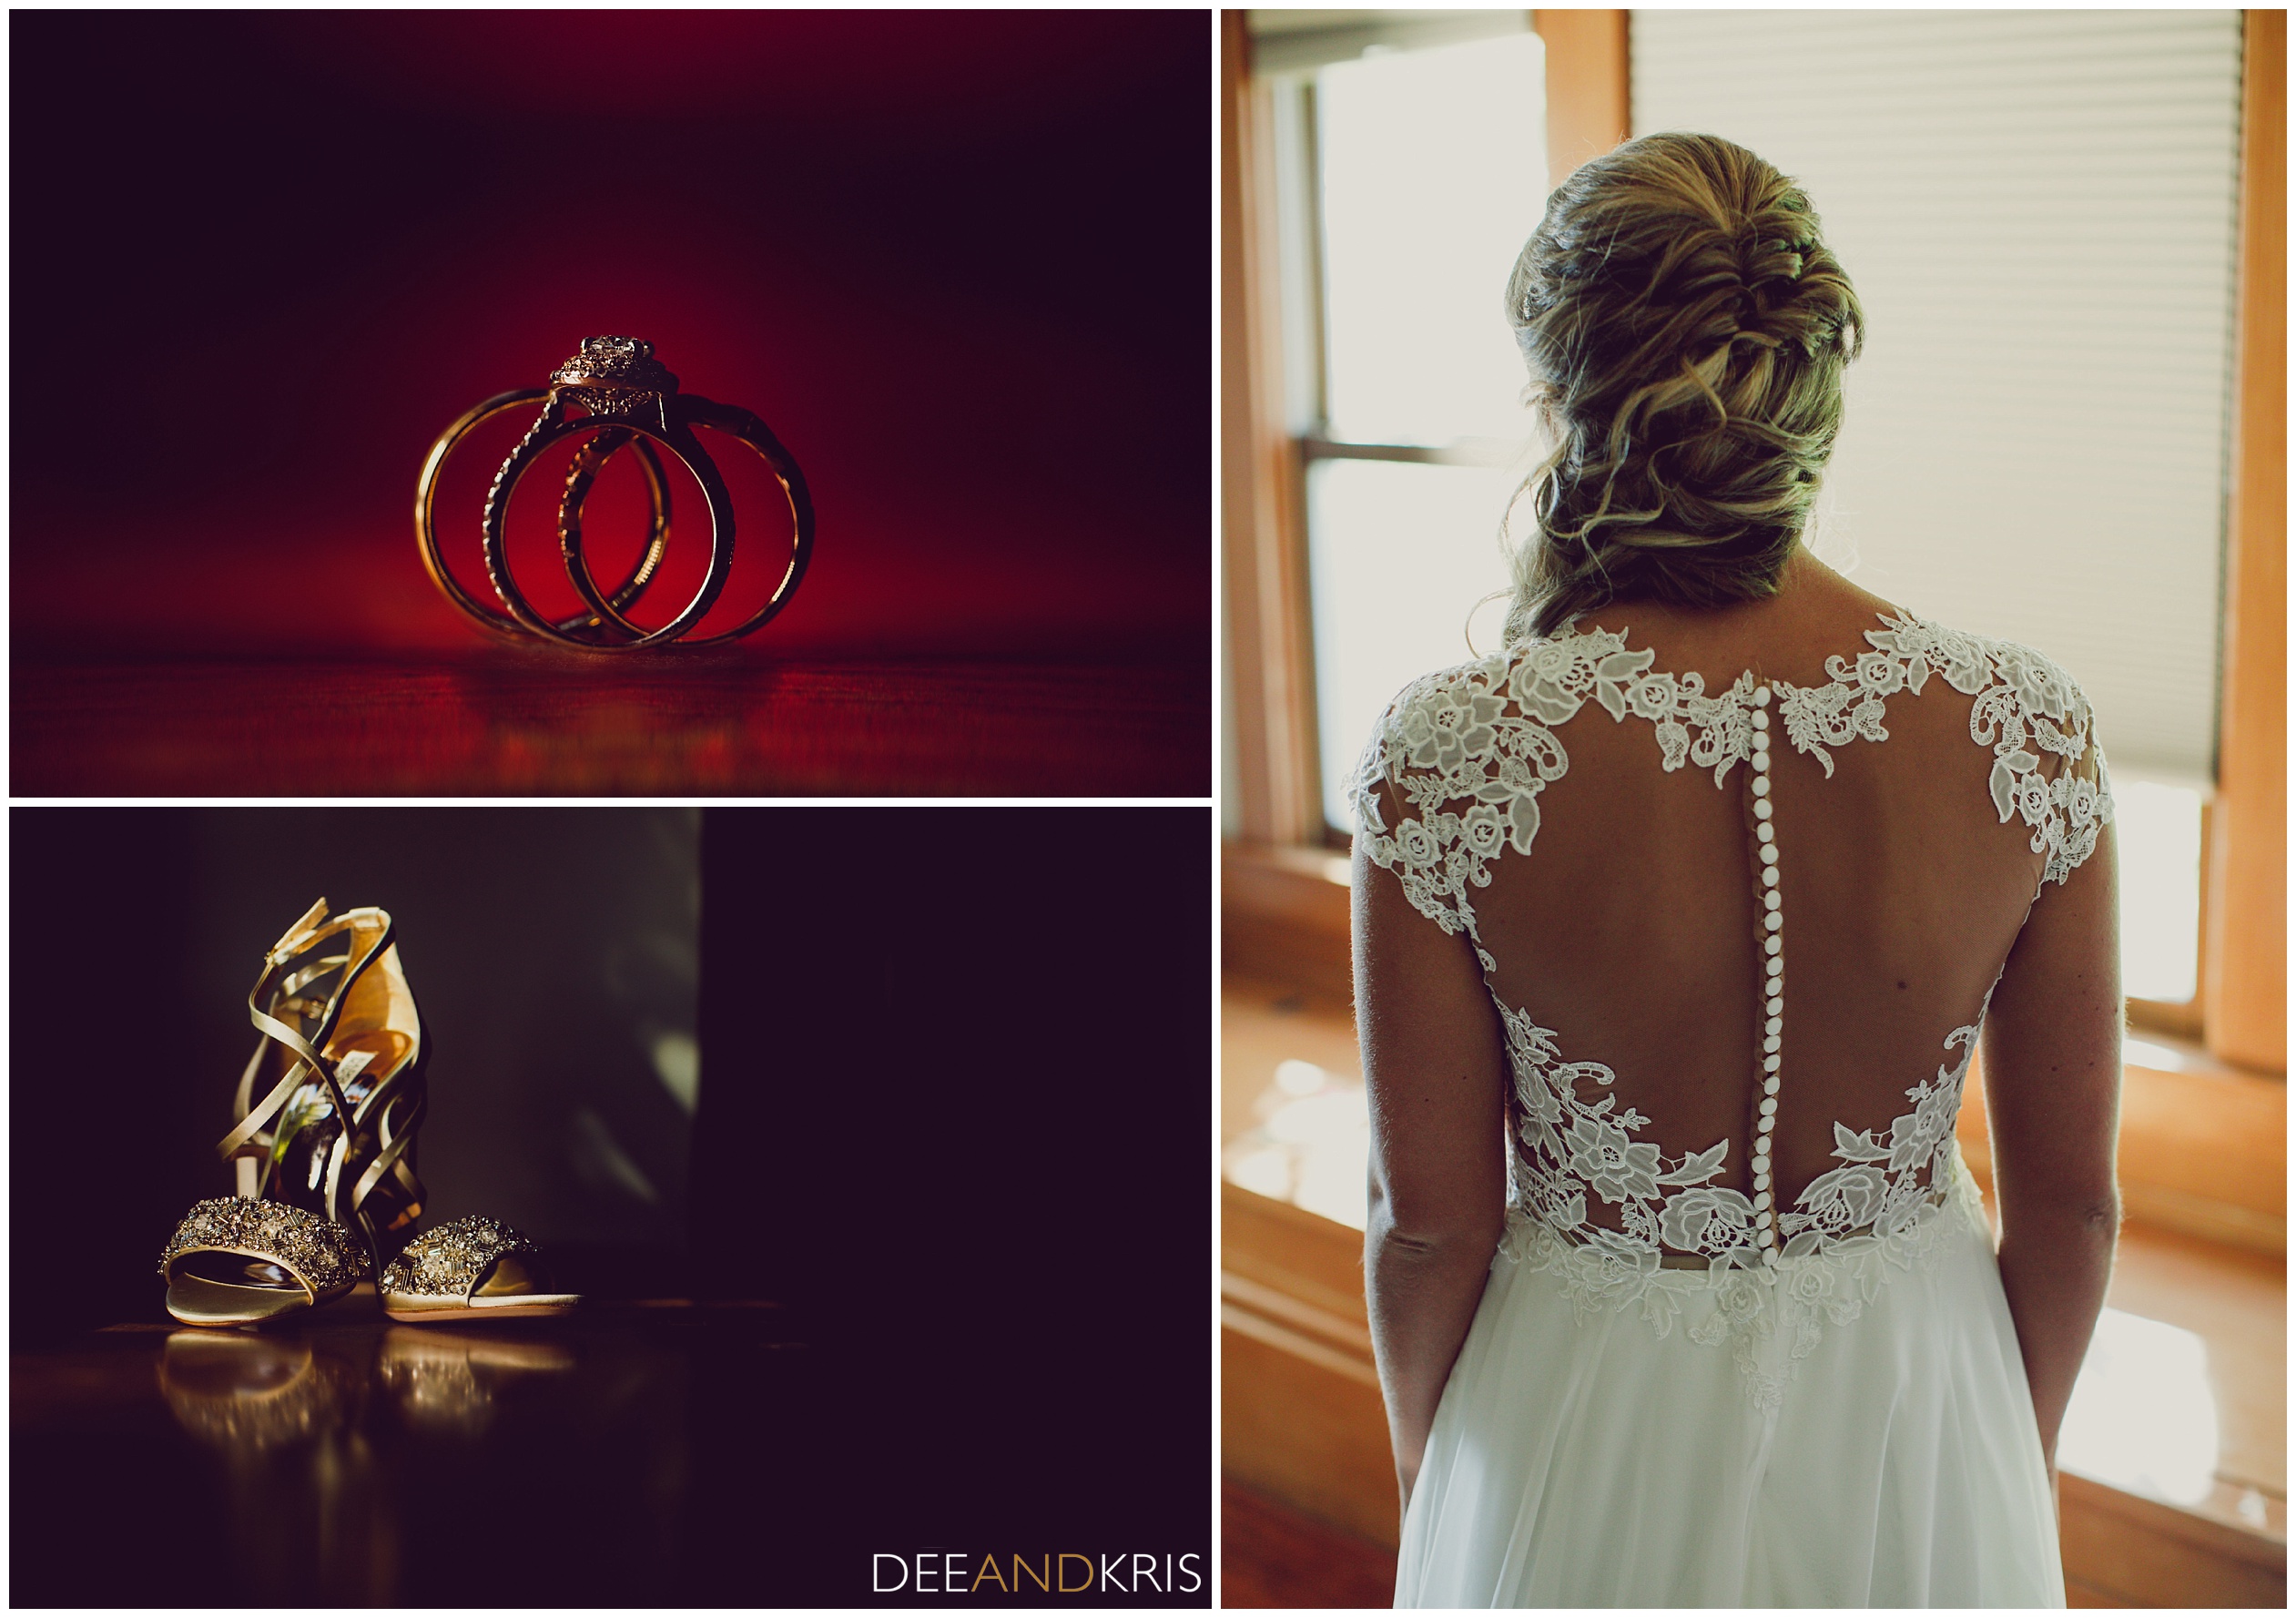 Dee and Kris photography photograph bride at her Scribner Bend Wedding, wedding details include an epic ring shot and a creative wedding shoe picture